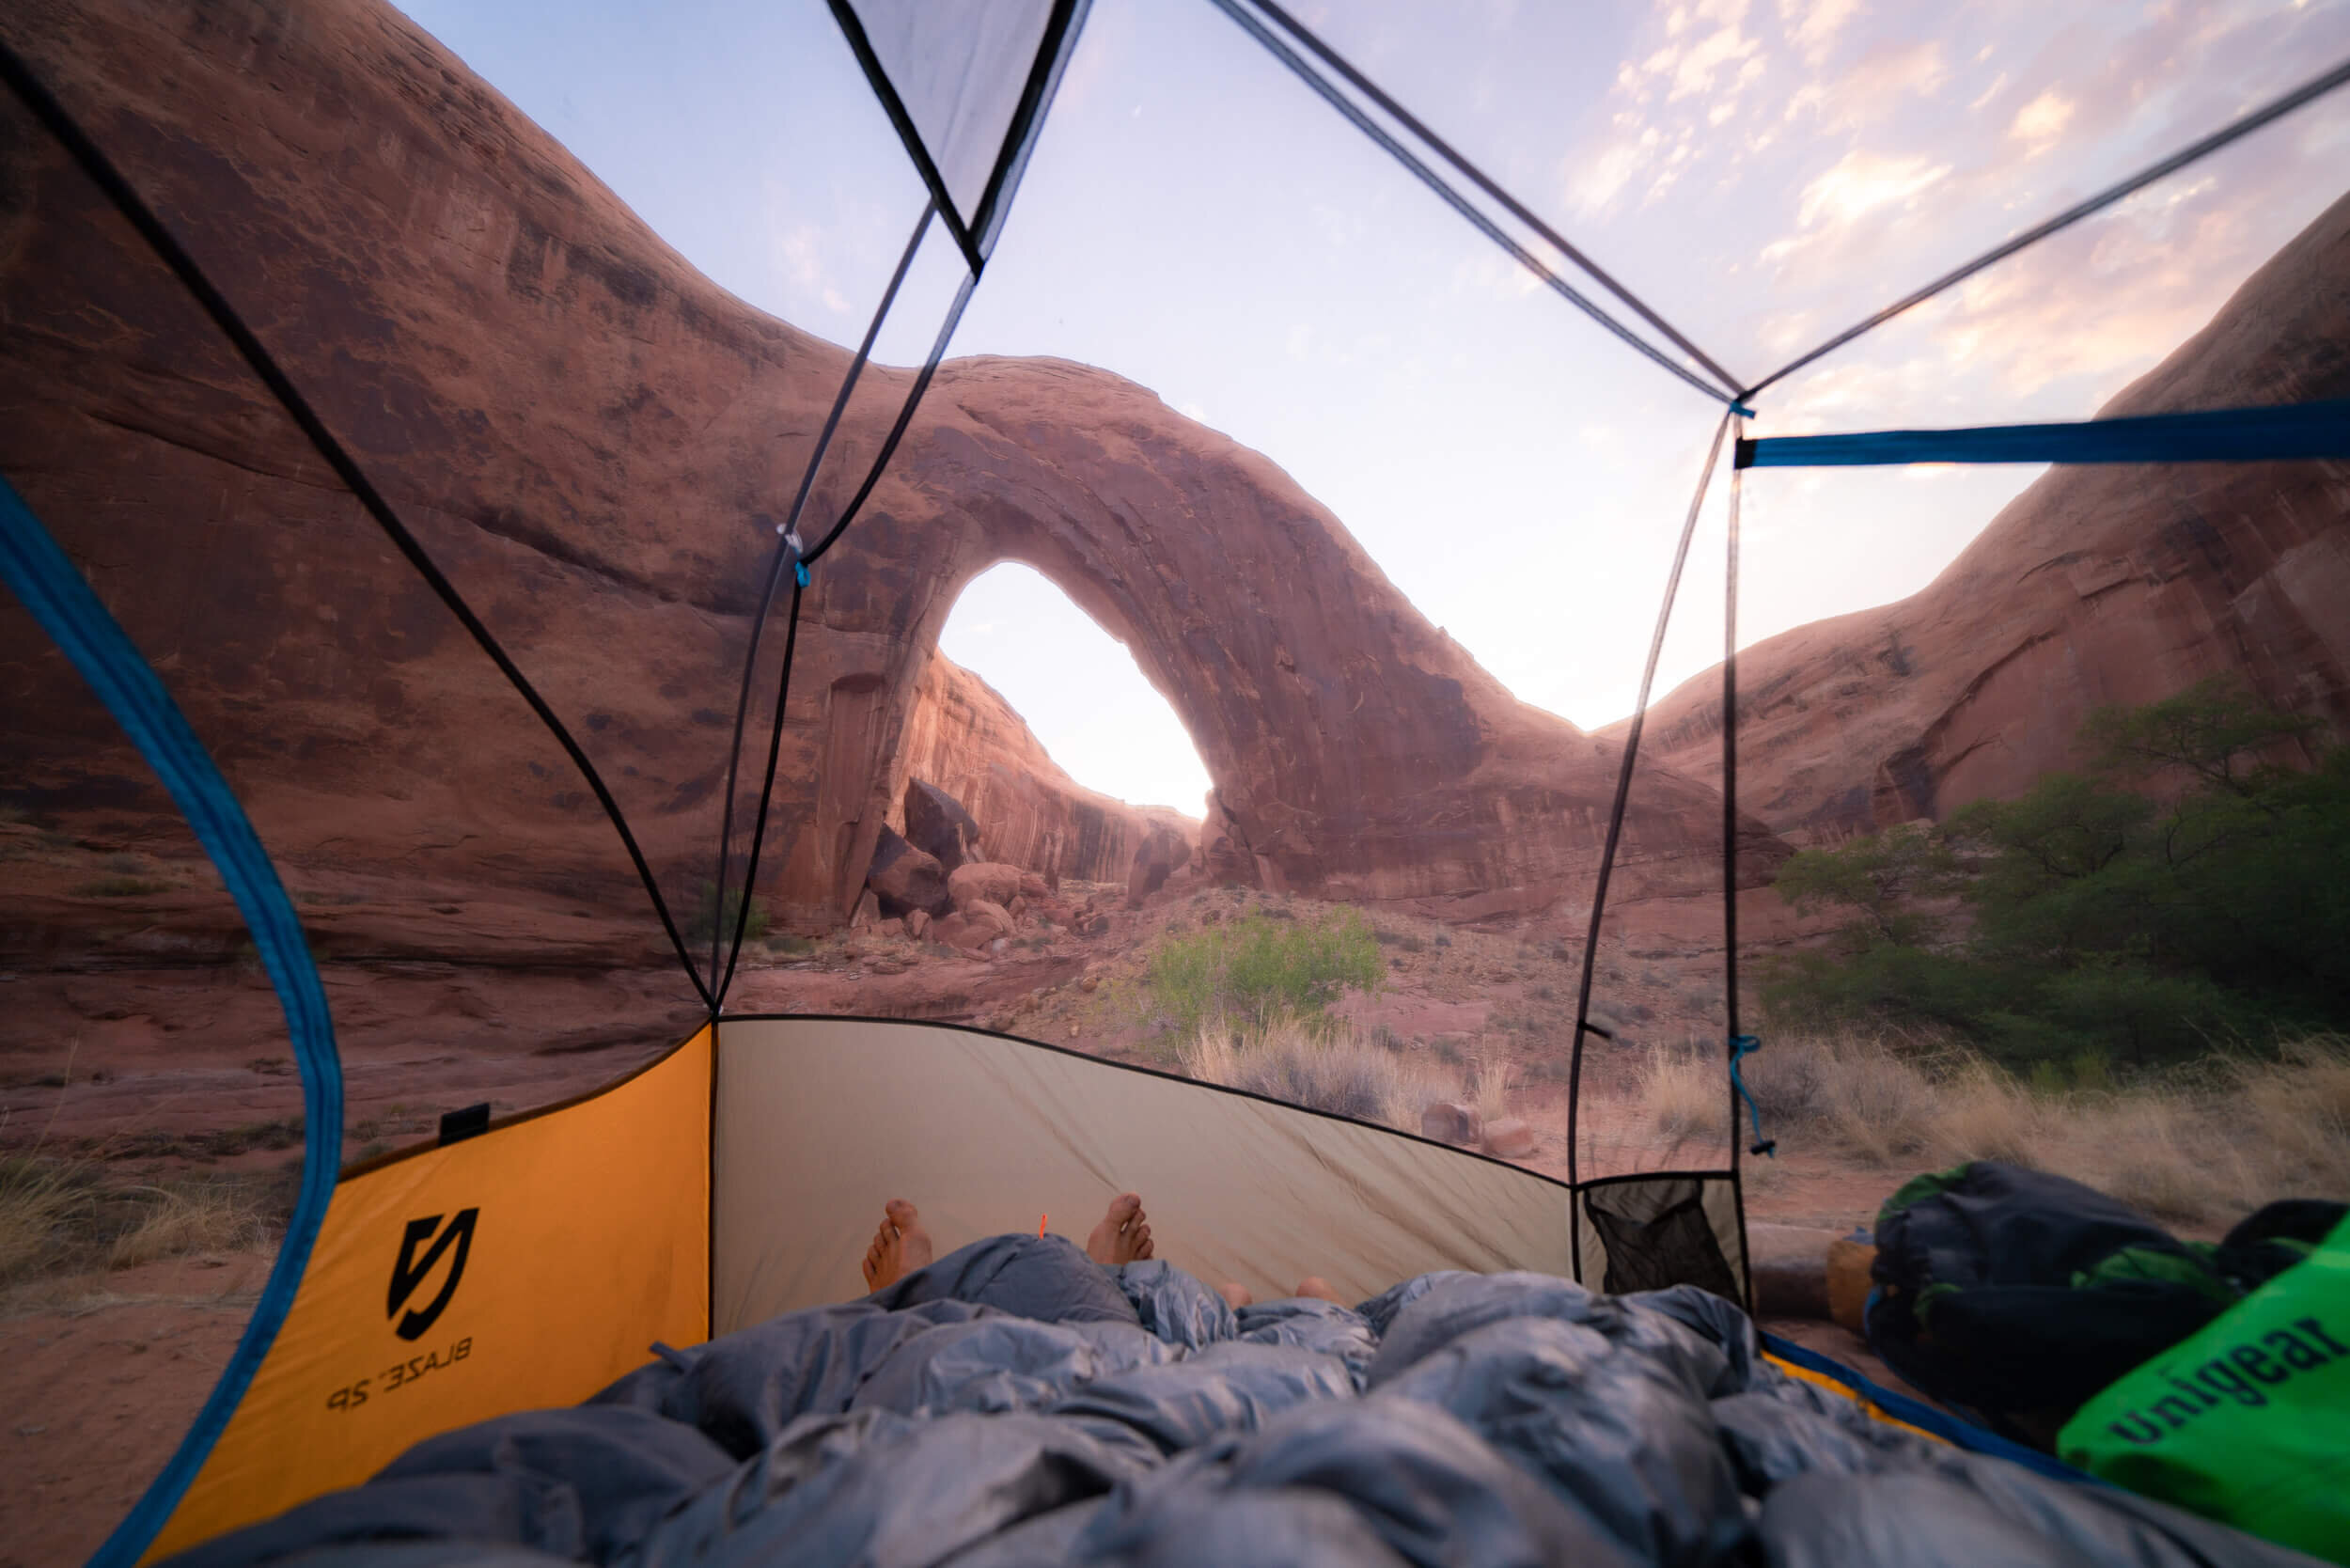 Our last night was spent camping near a large arch in Escalante.